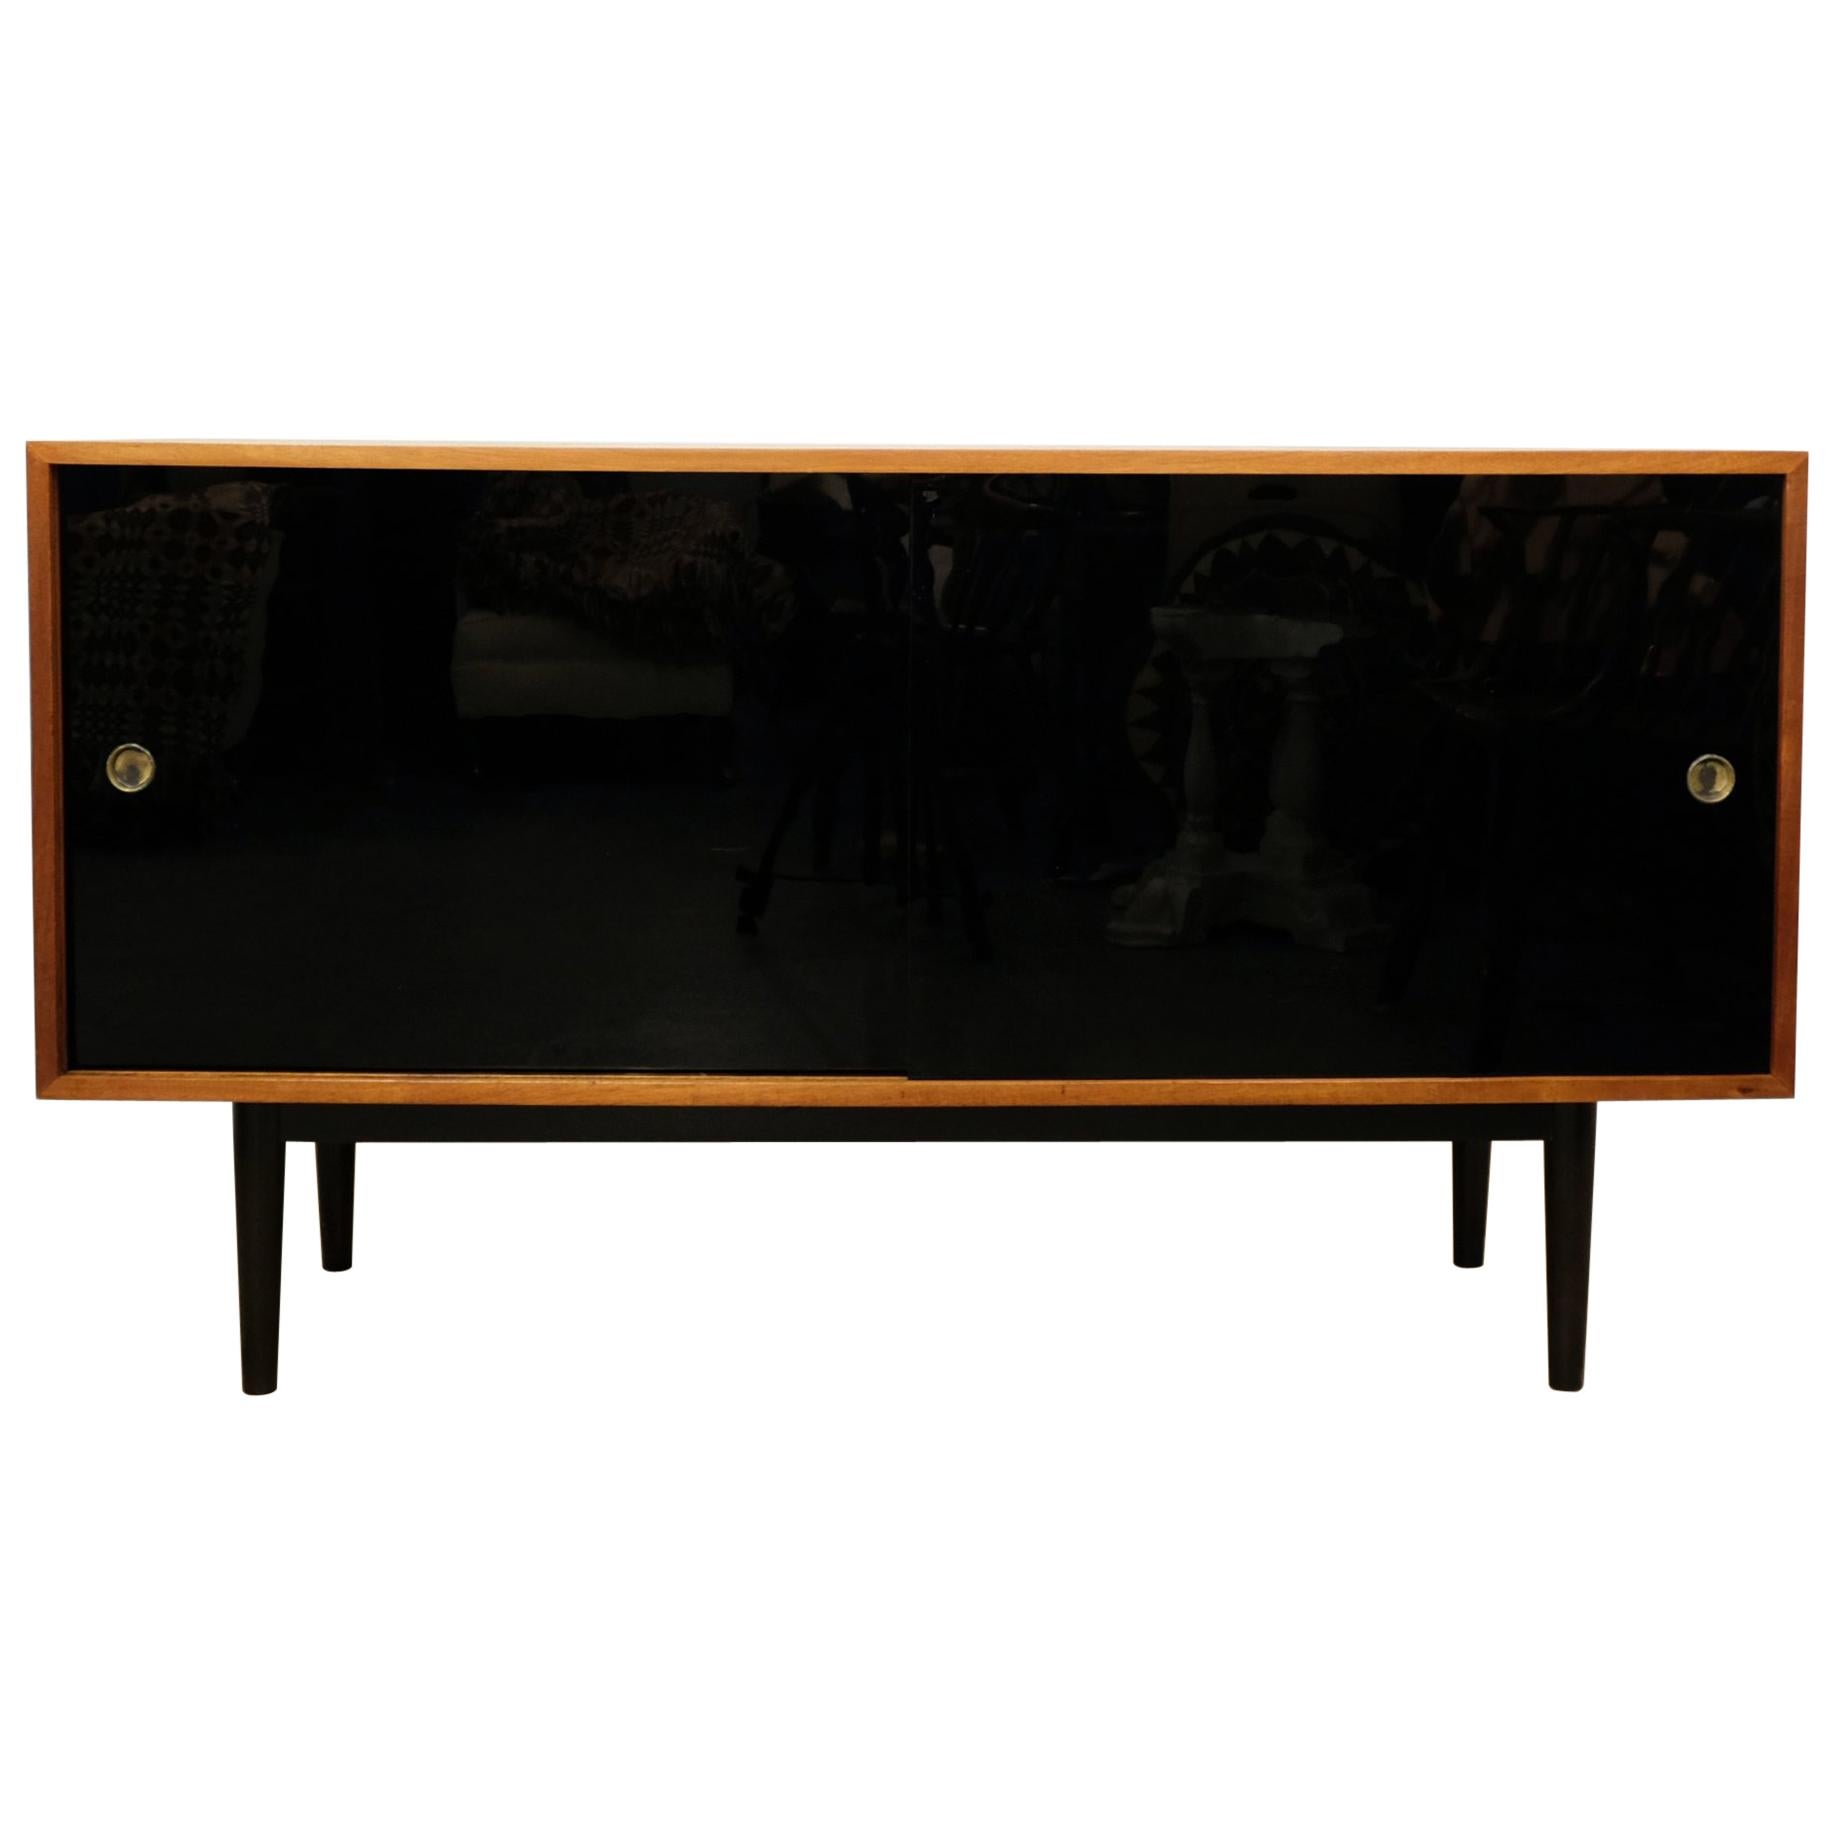 Robin Day for Hille of London Midcentury 'Interplan' Sideboard, 1954